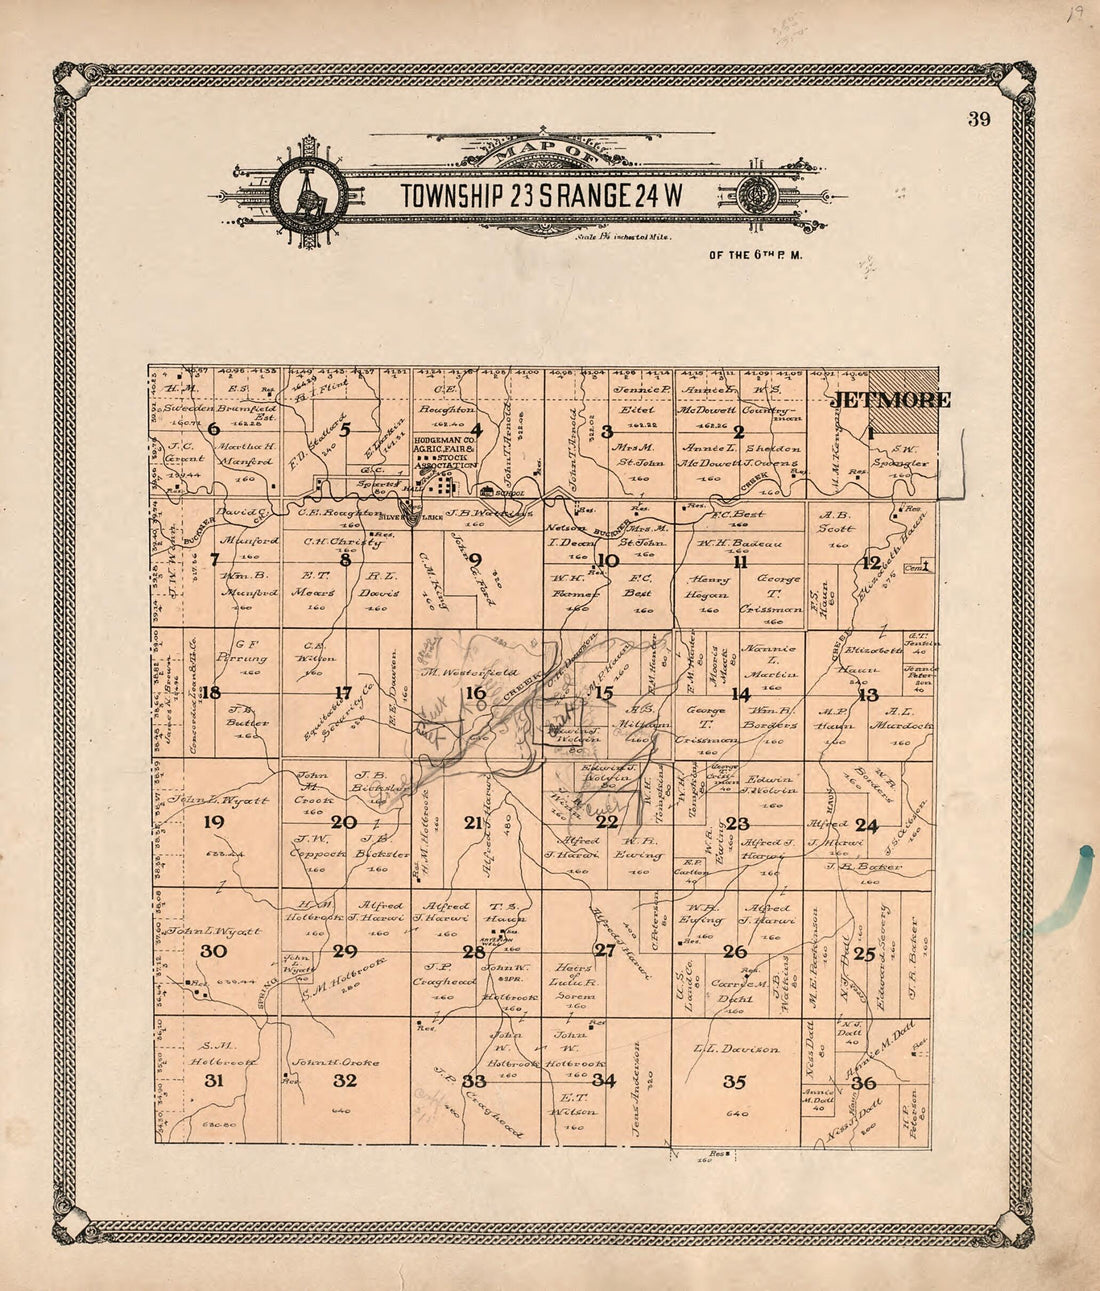 This old map of Map of Township 23 S Range 24 W from Standard Atlas of Hodgeman County, Kansas from 1907 was created by  Geo. A. Ogle &amp; Co in 1907